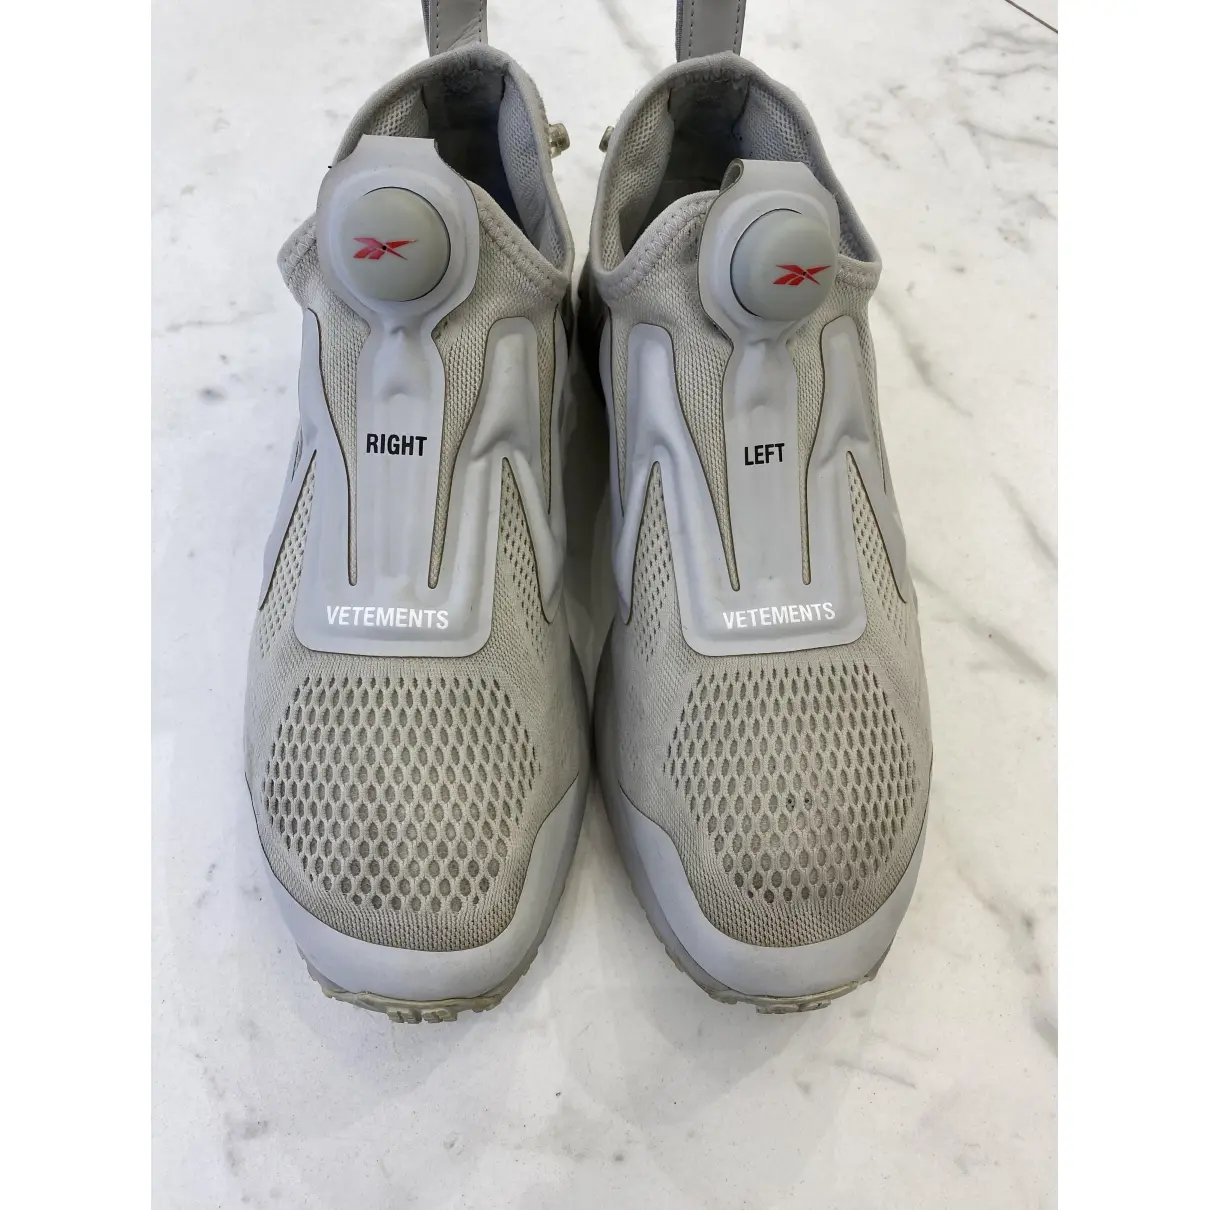 Reebok x VETEMENTS Cloth low trainers for sale